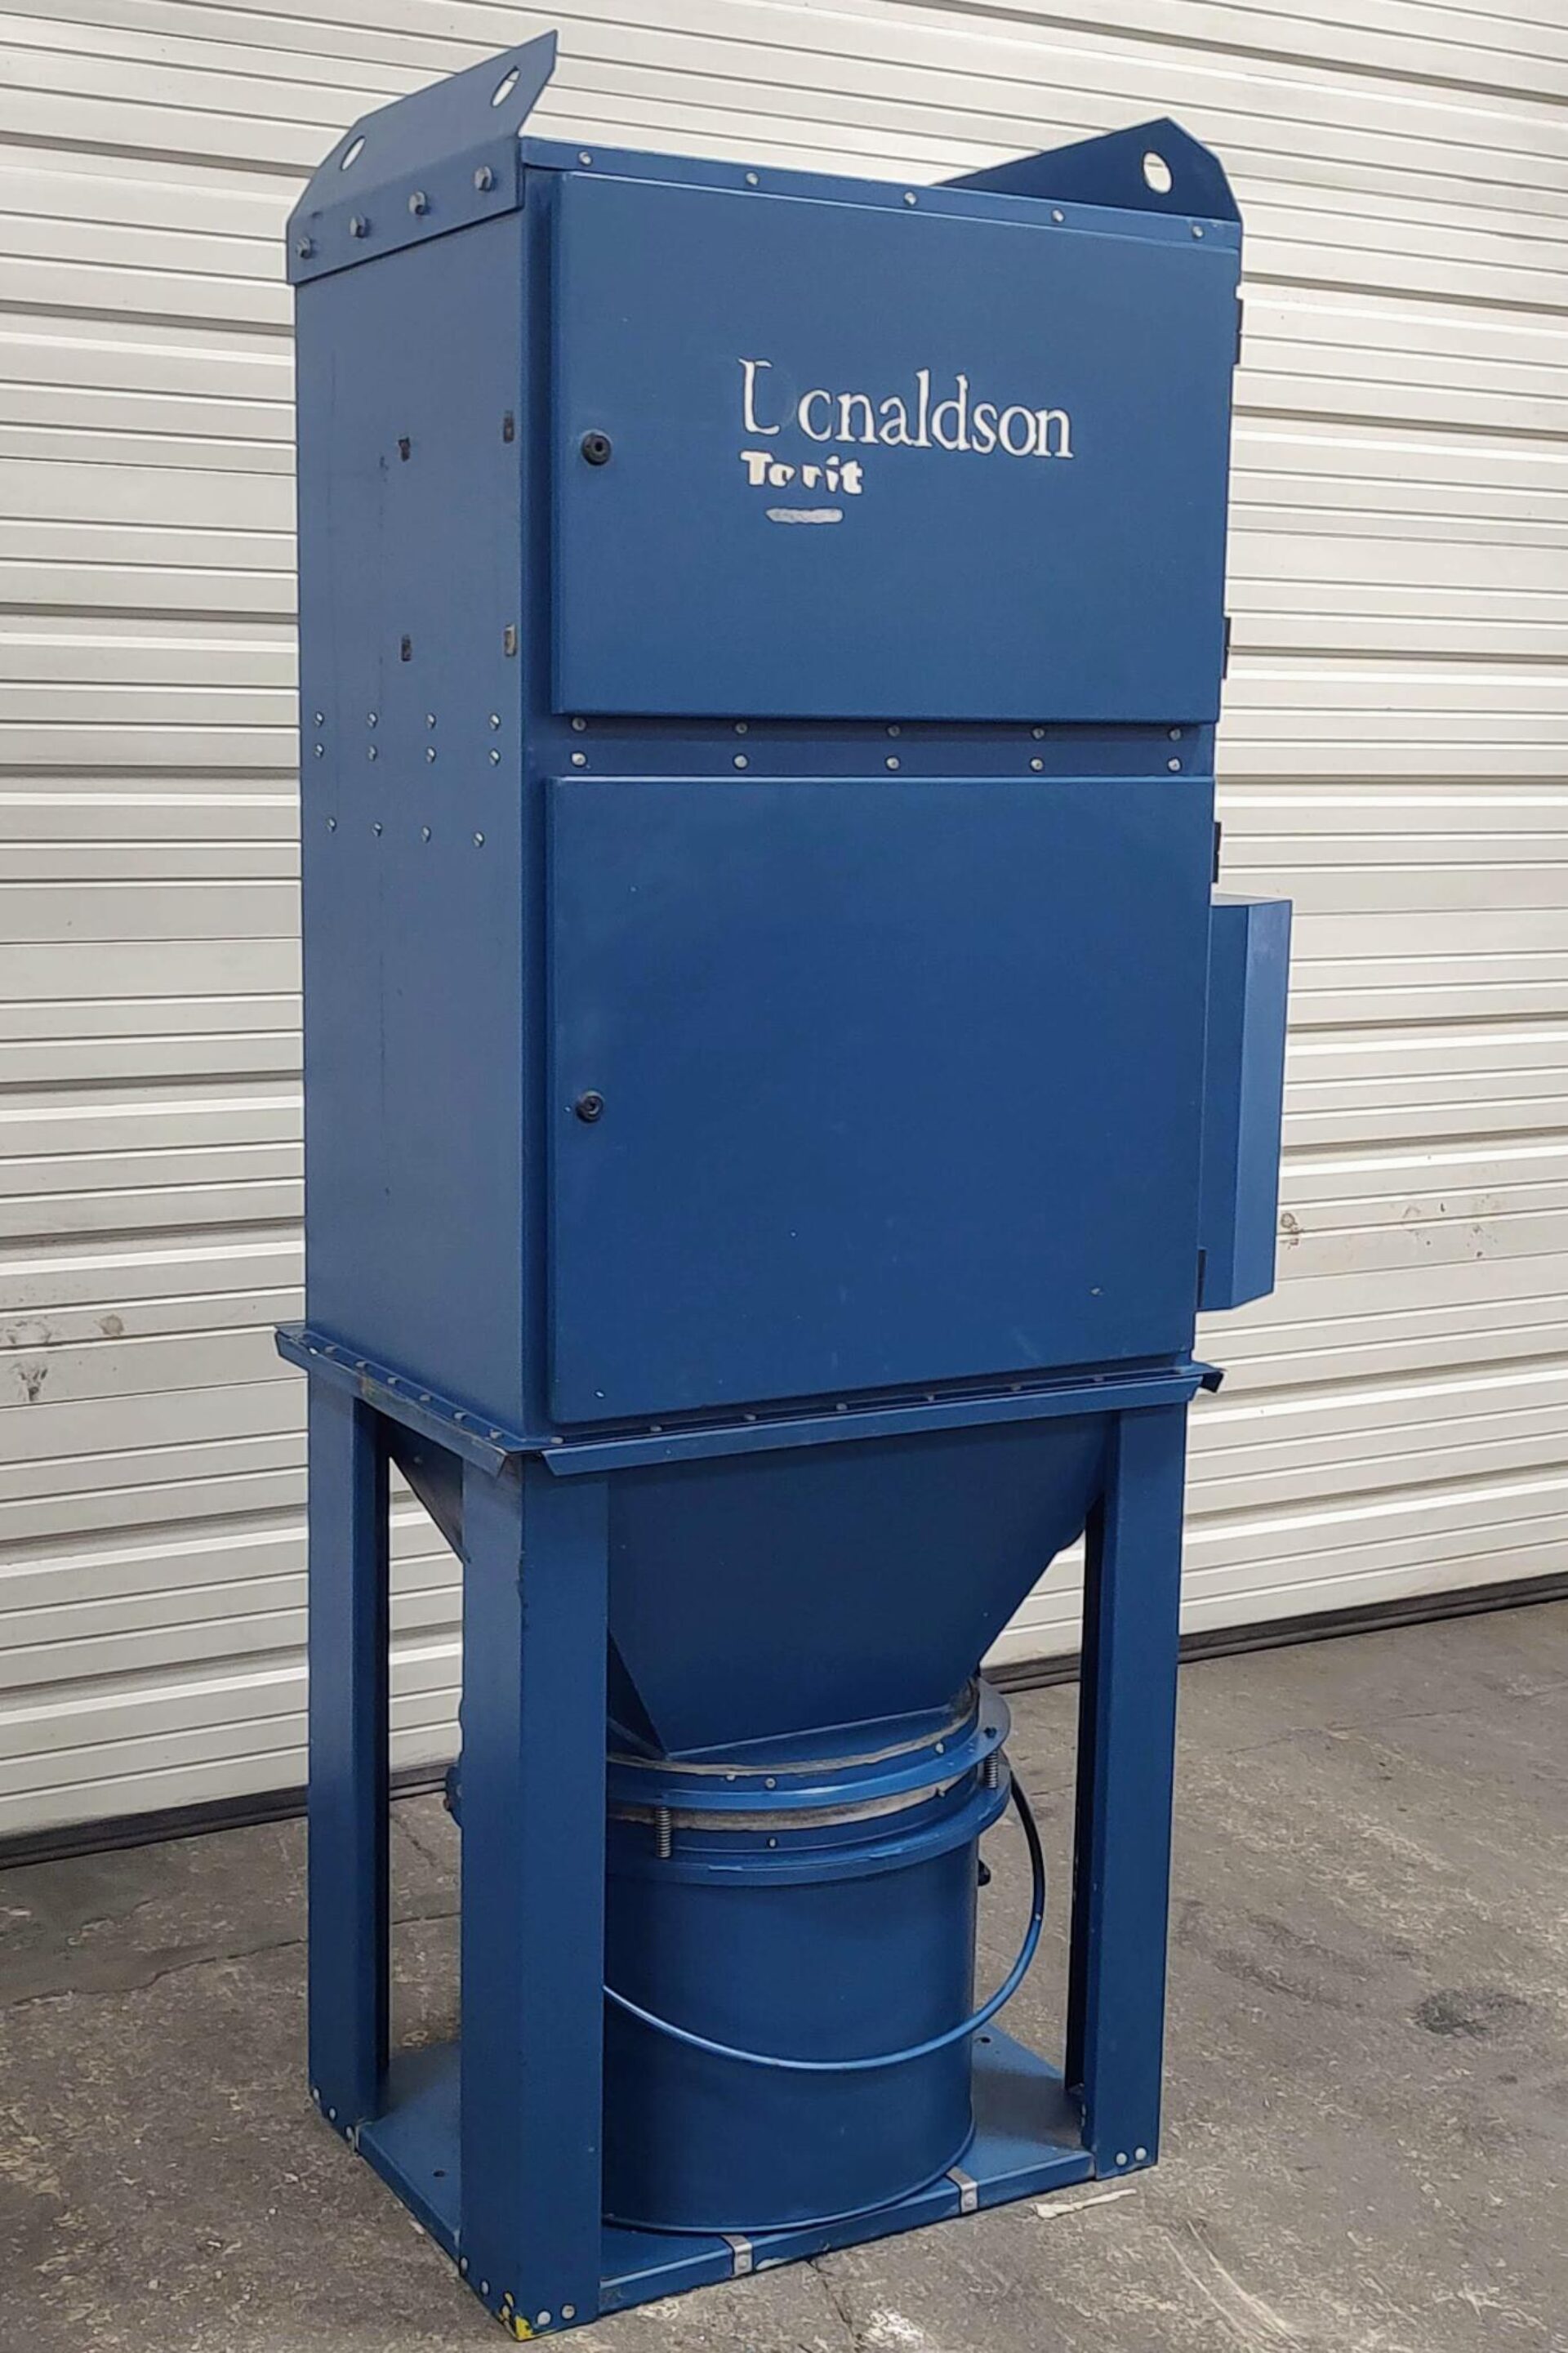 Featured image for 800 cfm Donaldson Torit #UMA100 Baghouse Dust Collector - AM21684